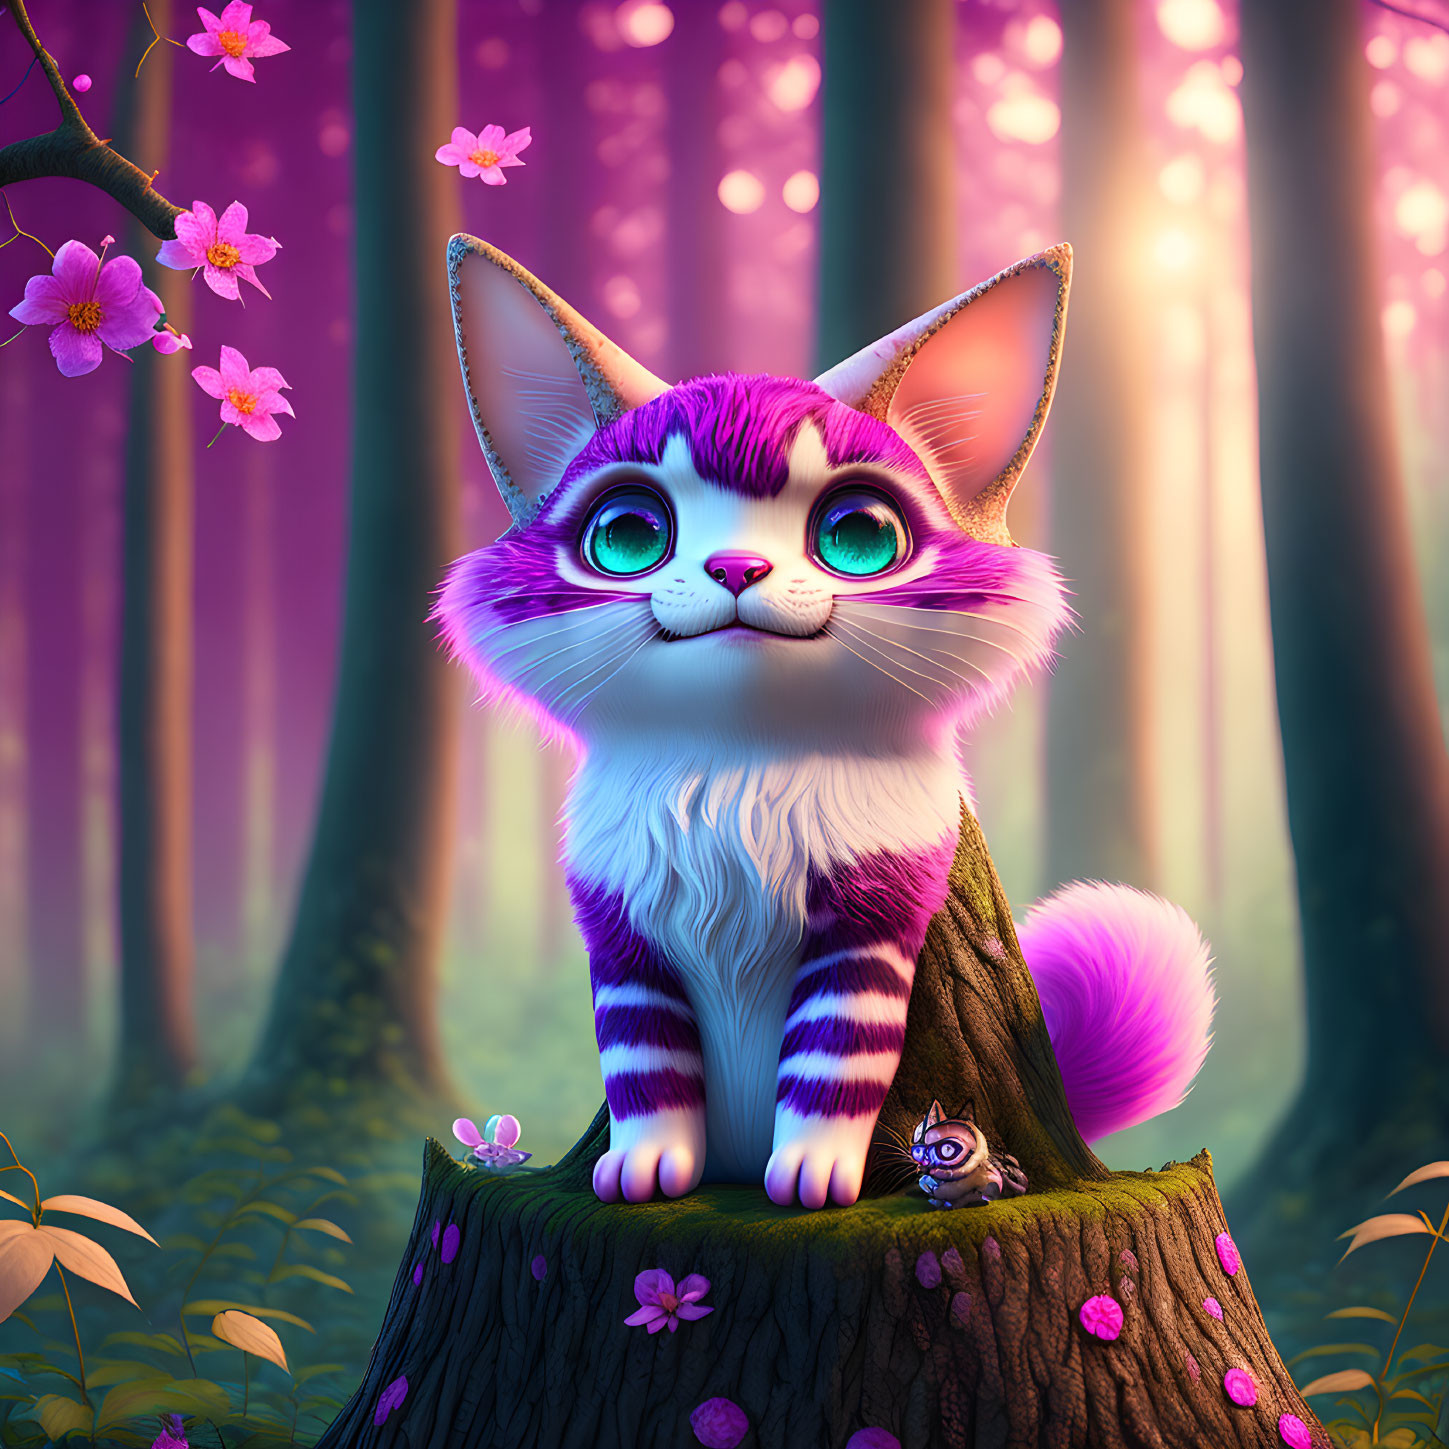 Colorful Cartoon Cat in Magical Forest with Purple and White Fur